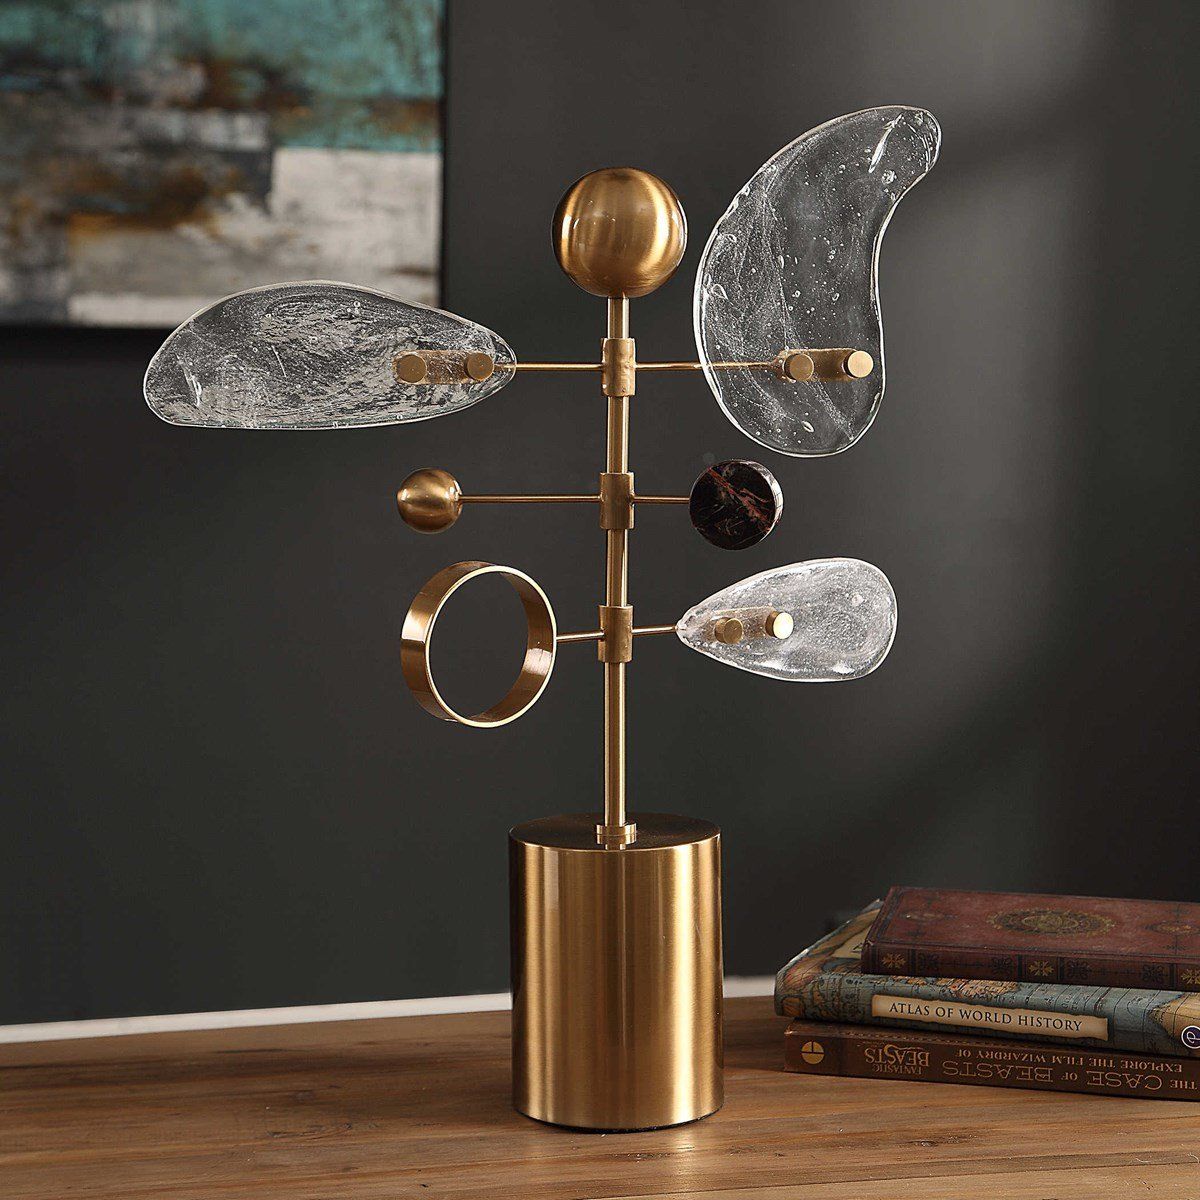 Gold abstract sculpture with geometric shapes